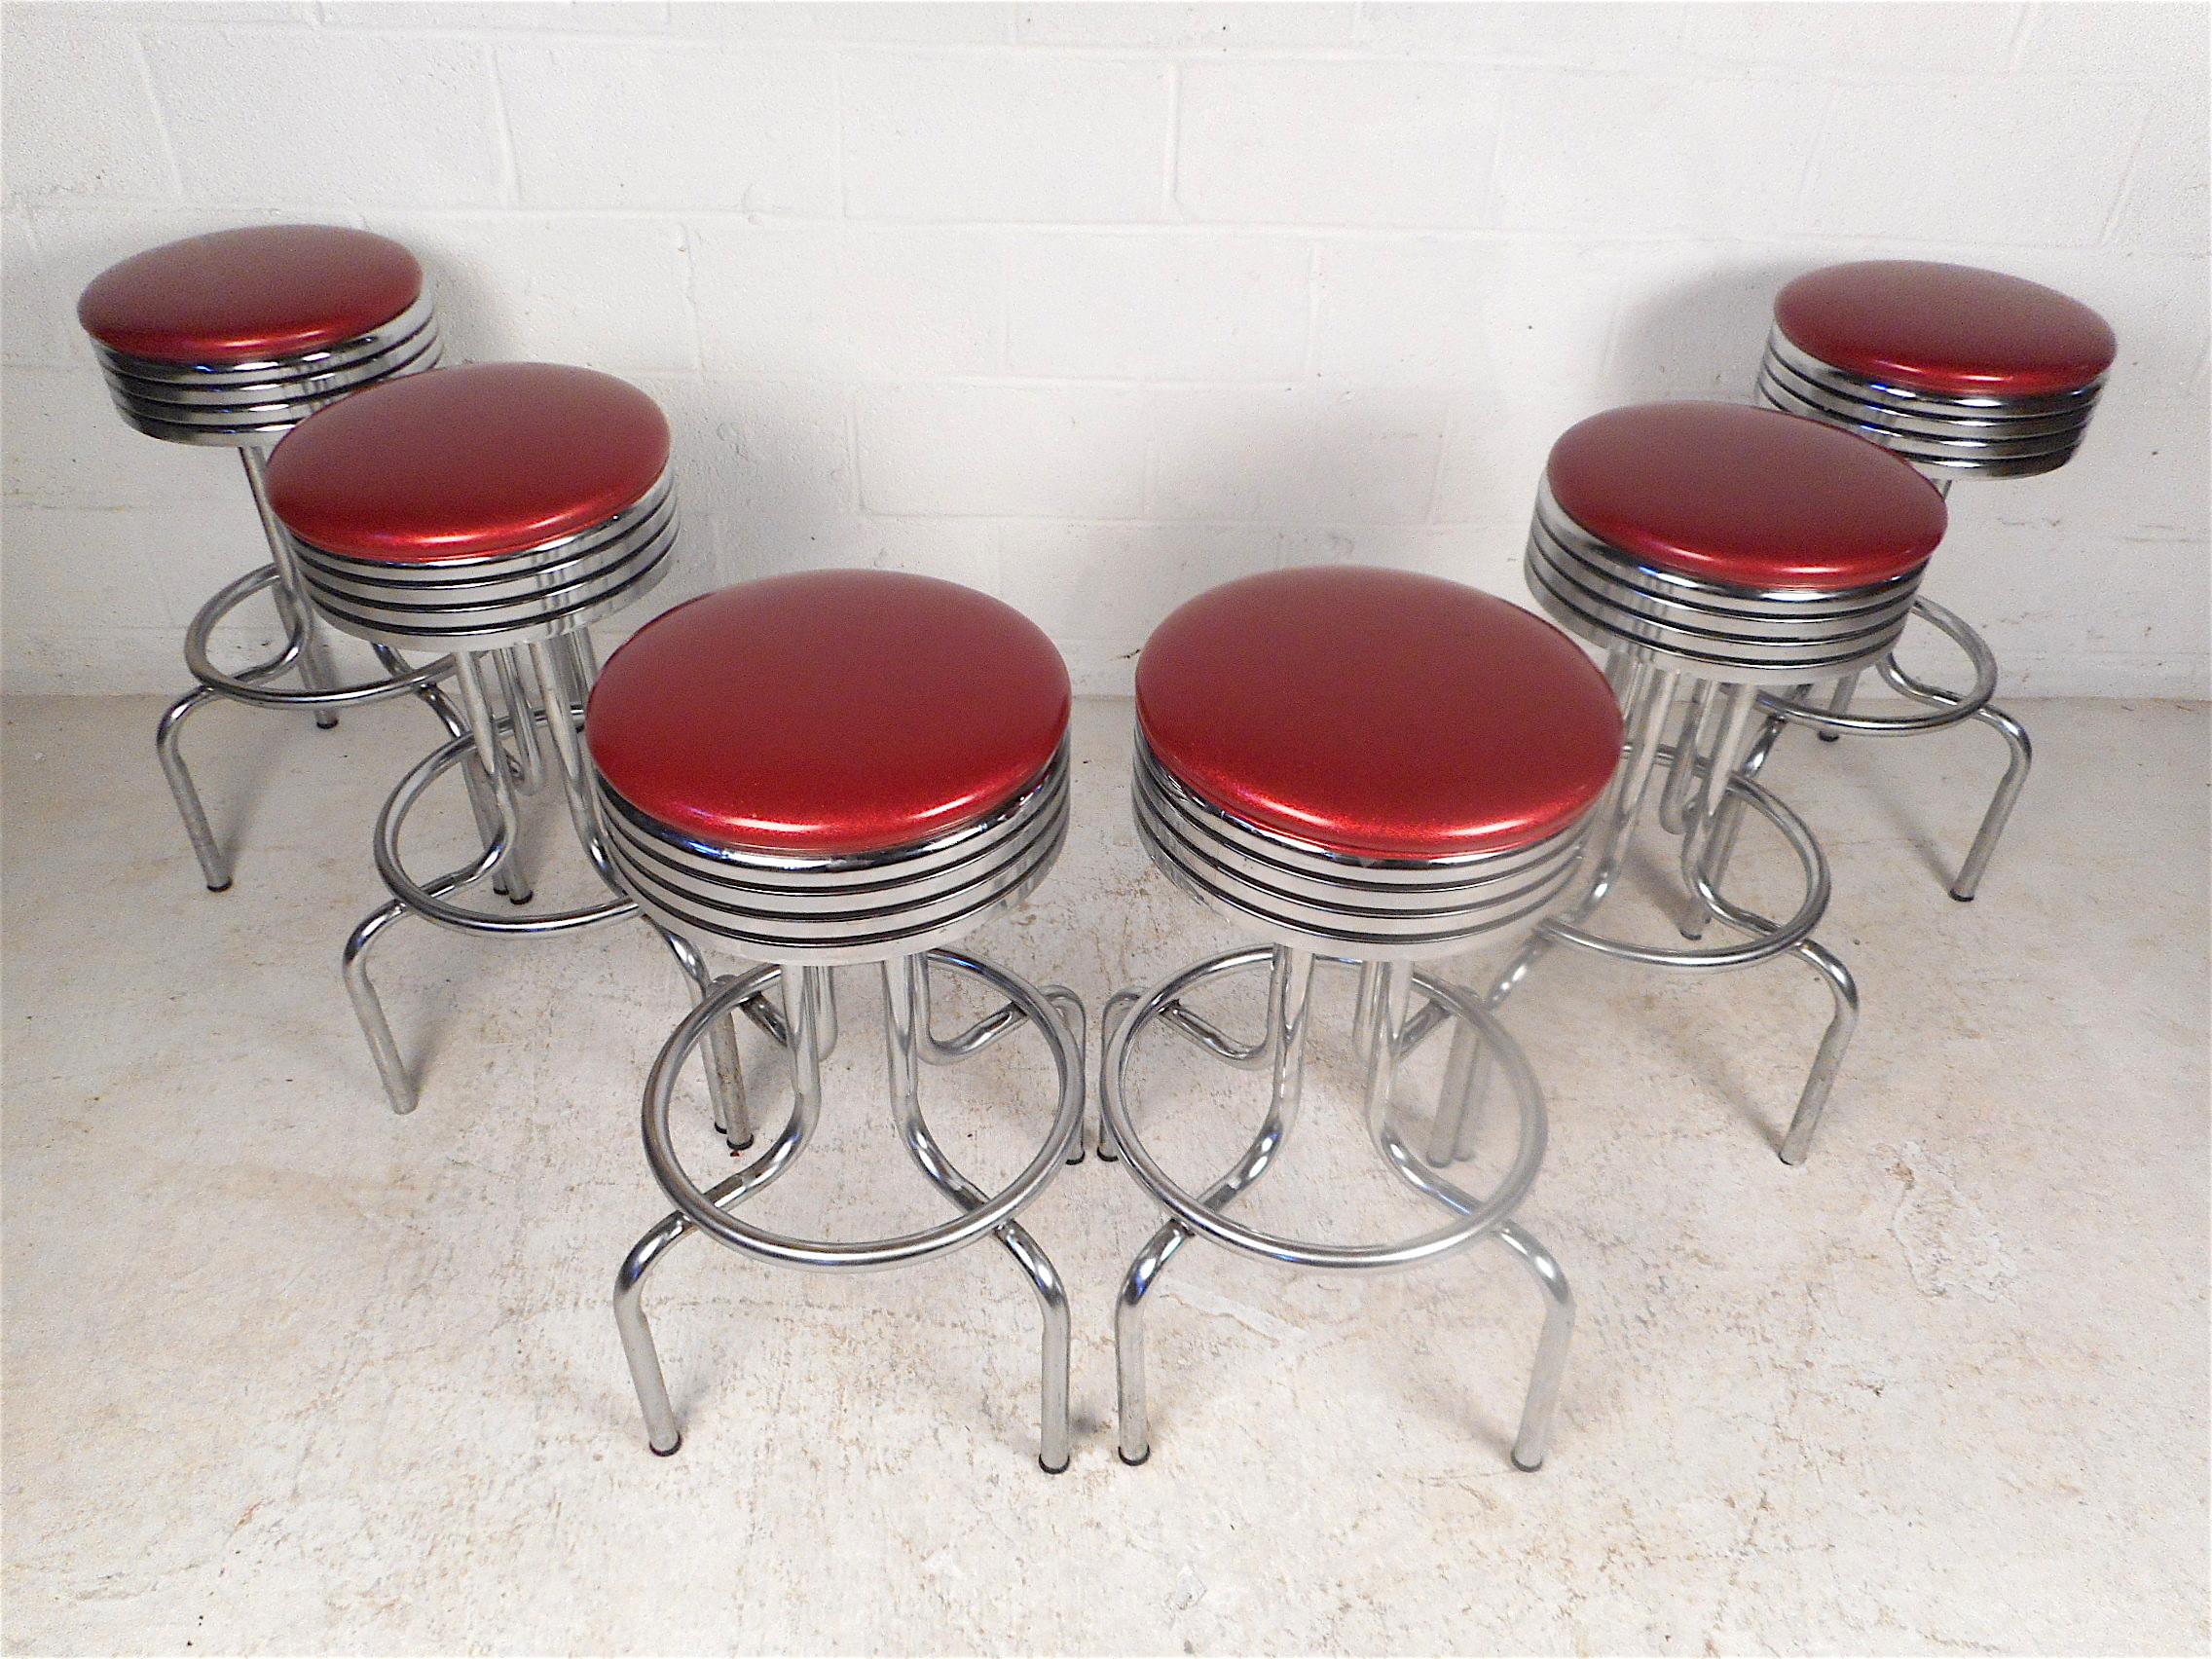 Stylish set of 6 midcentury stools. Sturdy chrome frame with footrests and swiveling seats. Classic longneck design. Sure to make an interesting addition to any modern interior. Please confirm item location with dealer (NJ or NY).